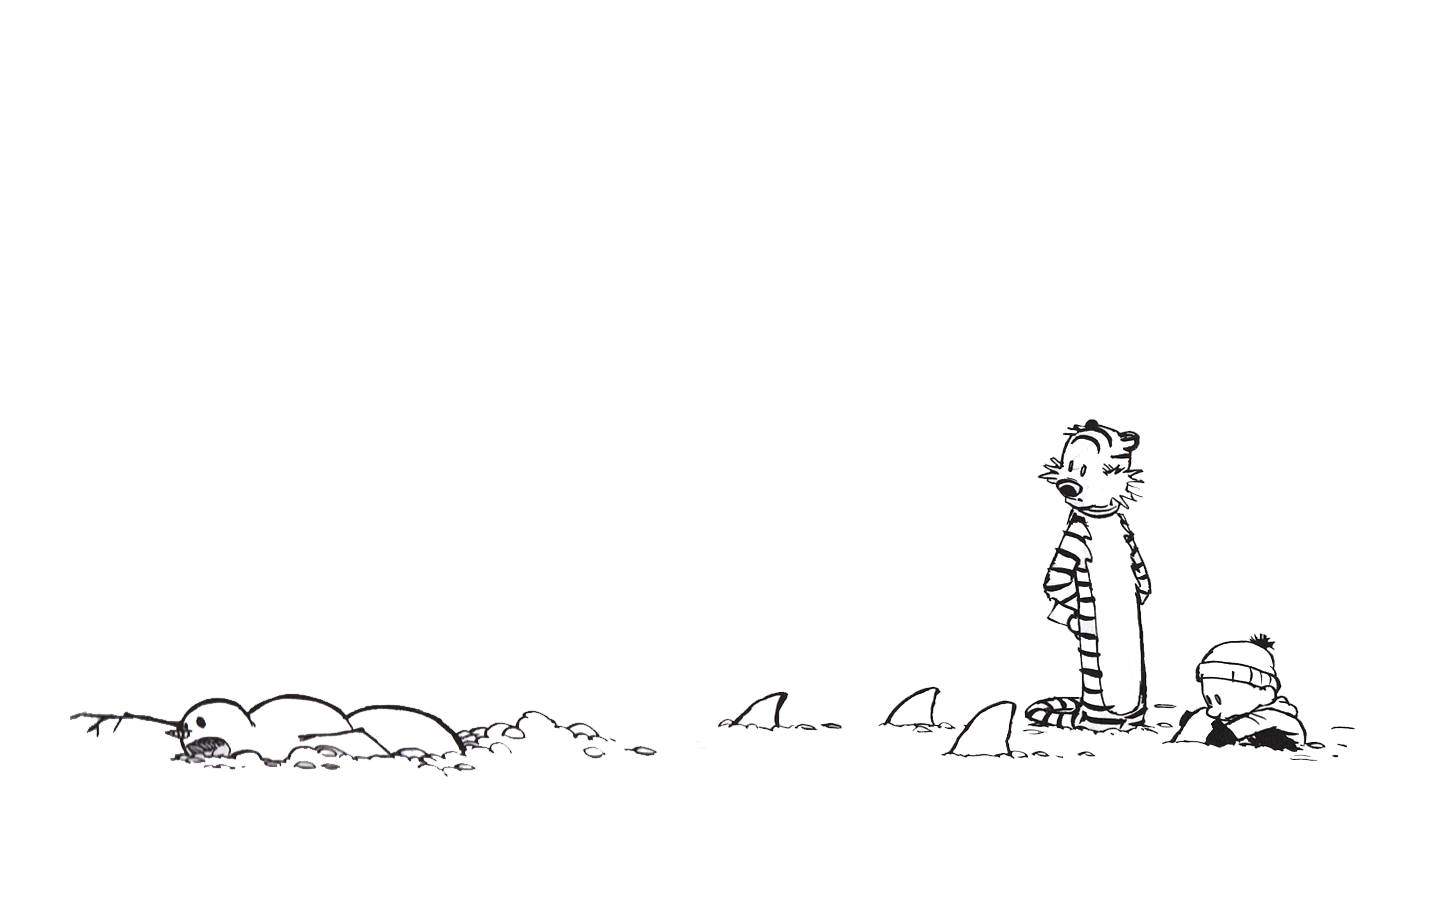 Free Calvin And Hobbes Wallpaper Downloads, [100+] Calvin And Hobbes  Wallpapers for FREE 